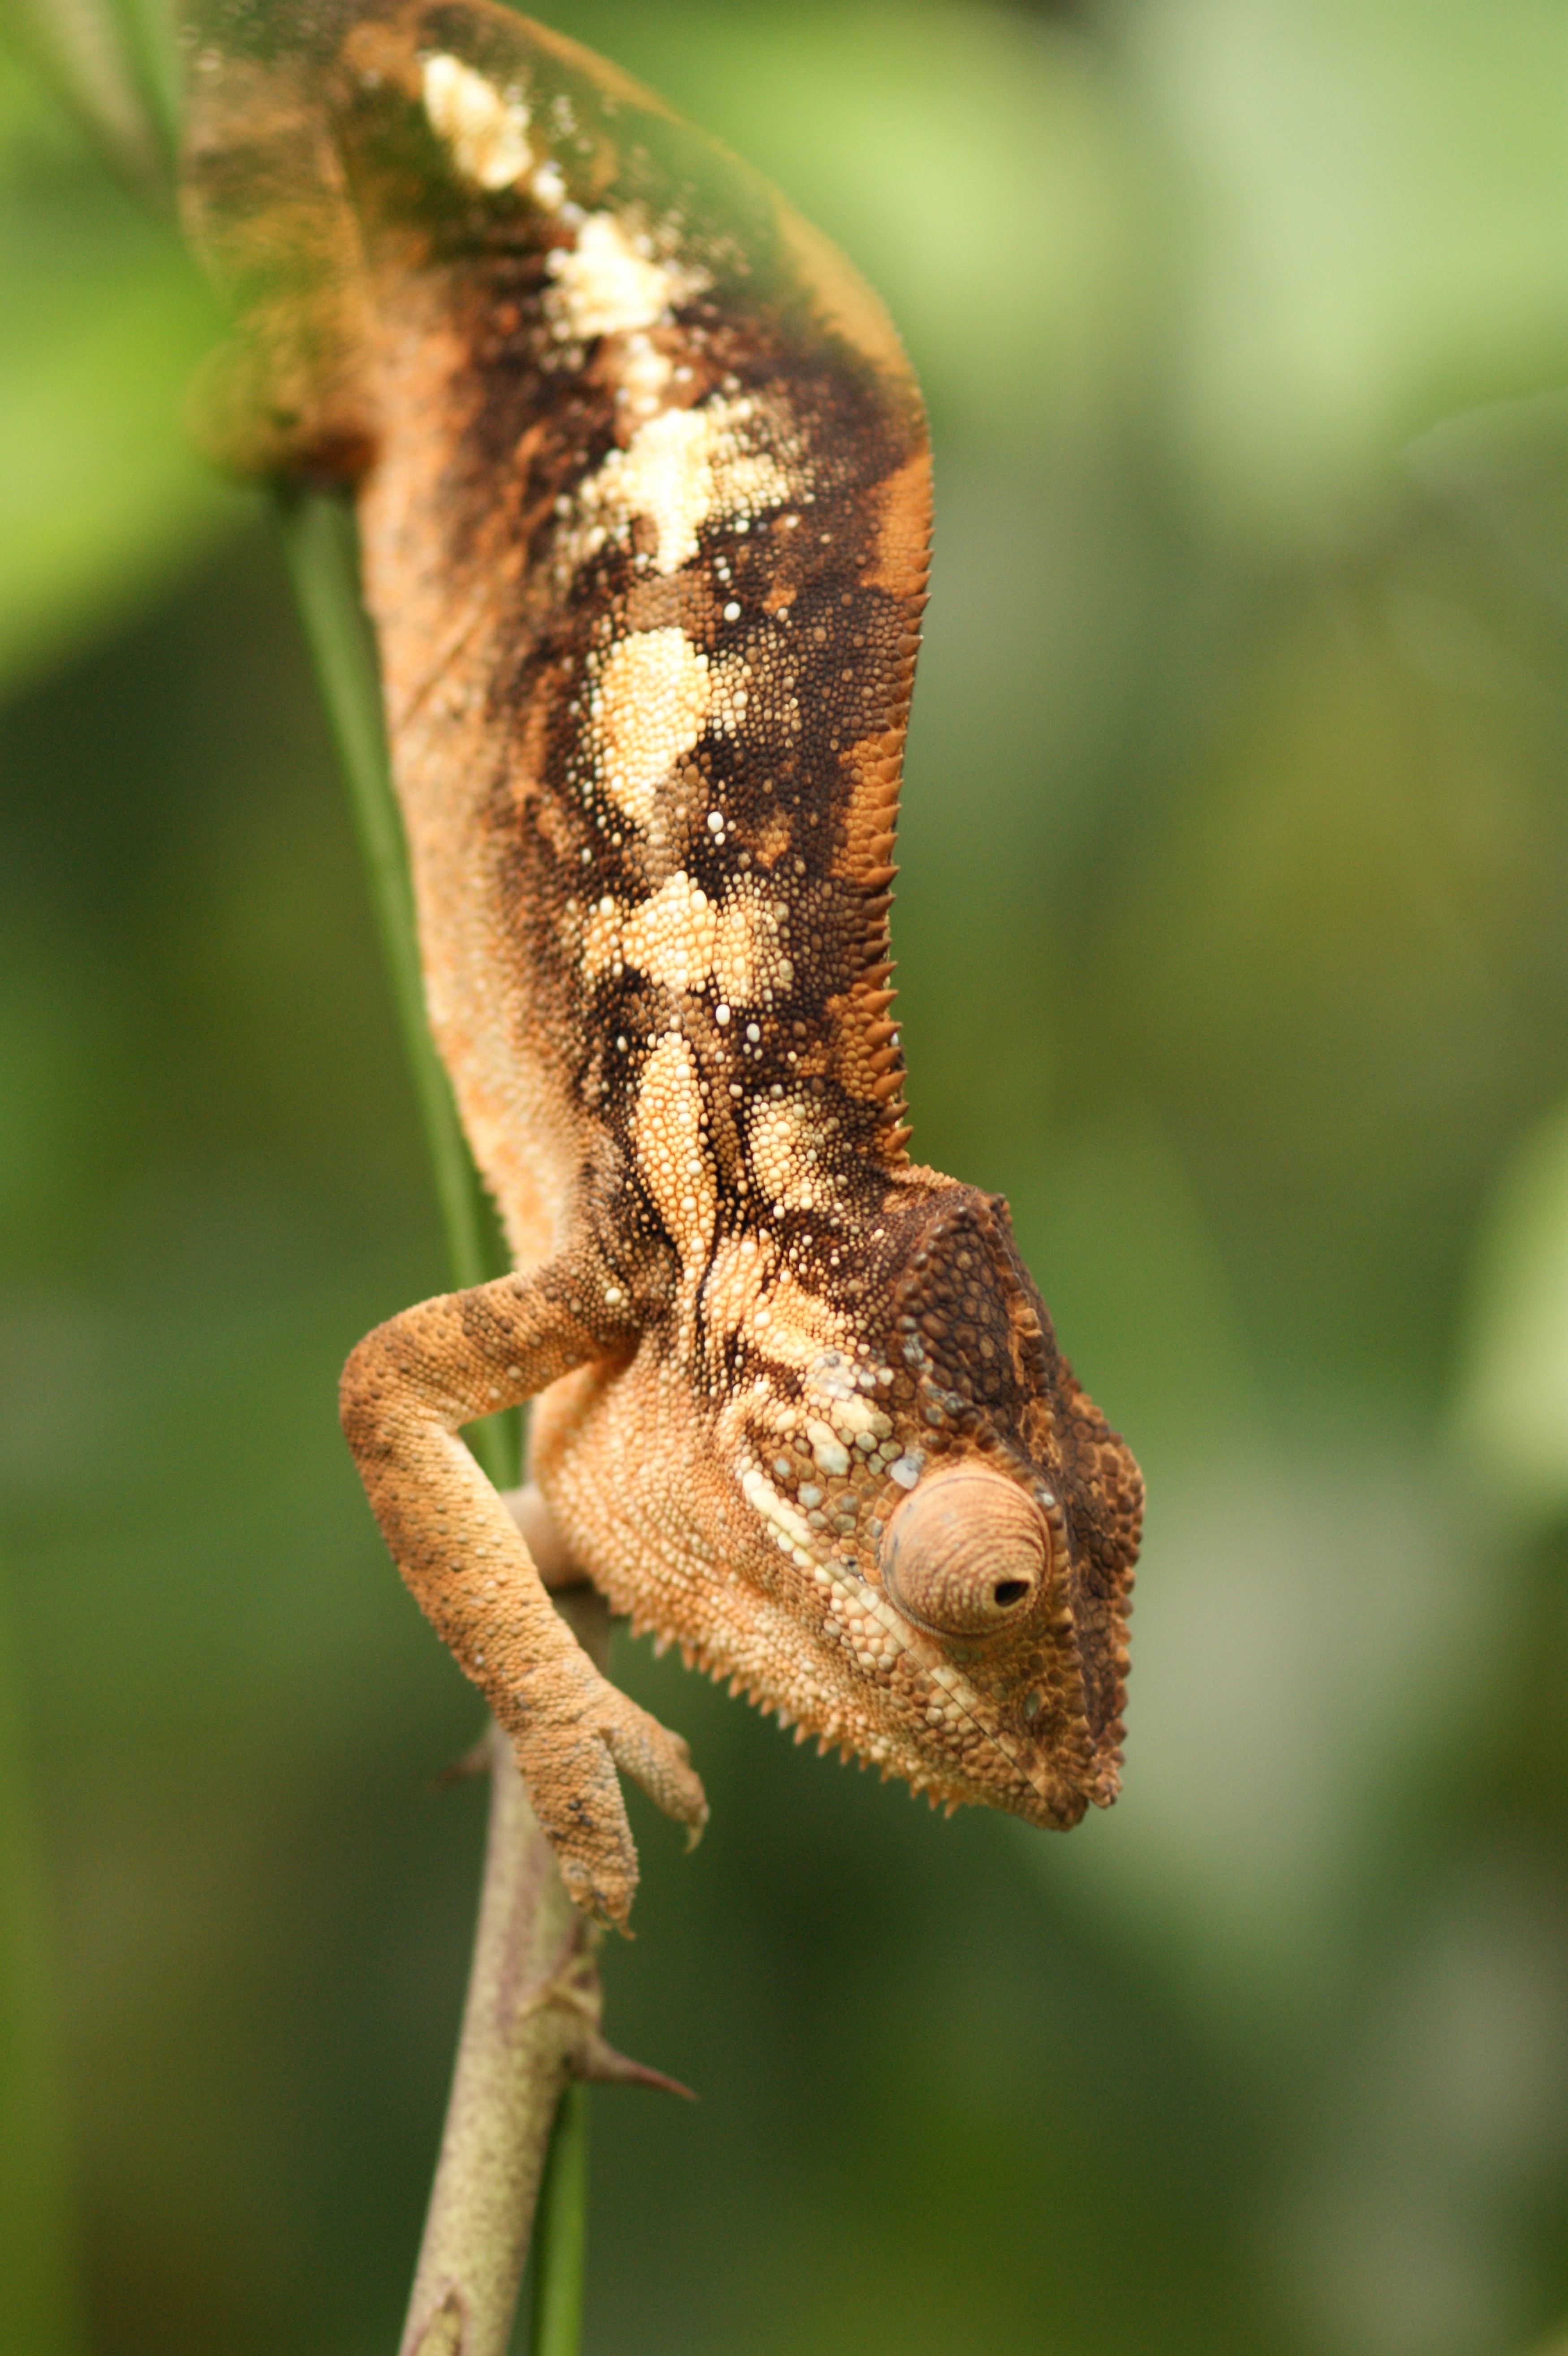 brown, white and black chameleon in closeup photography